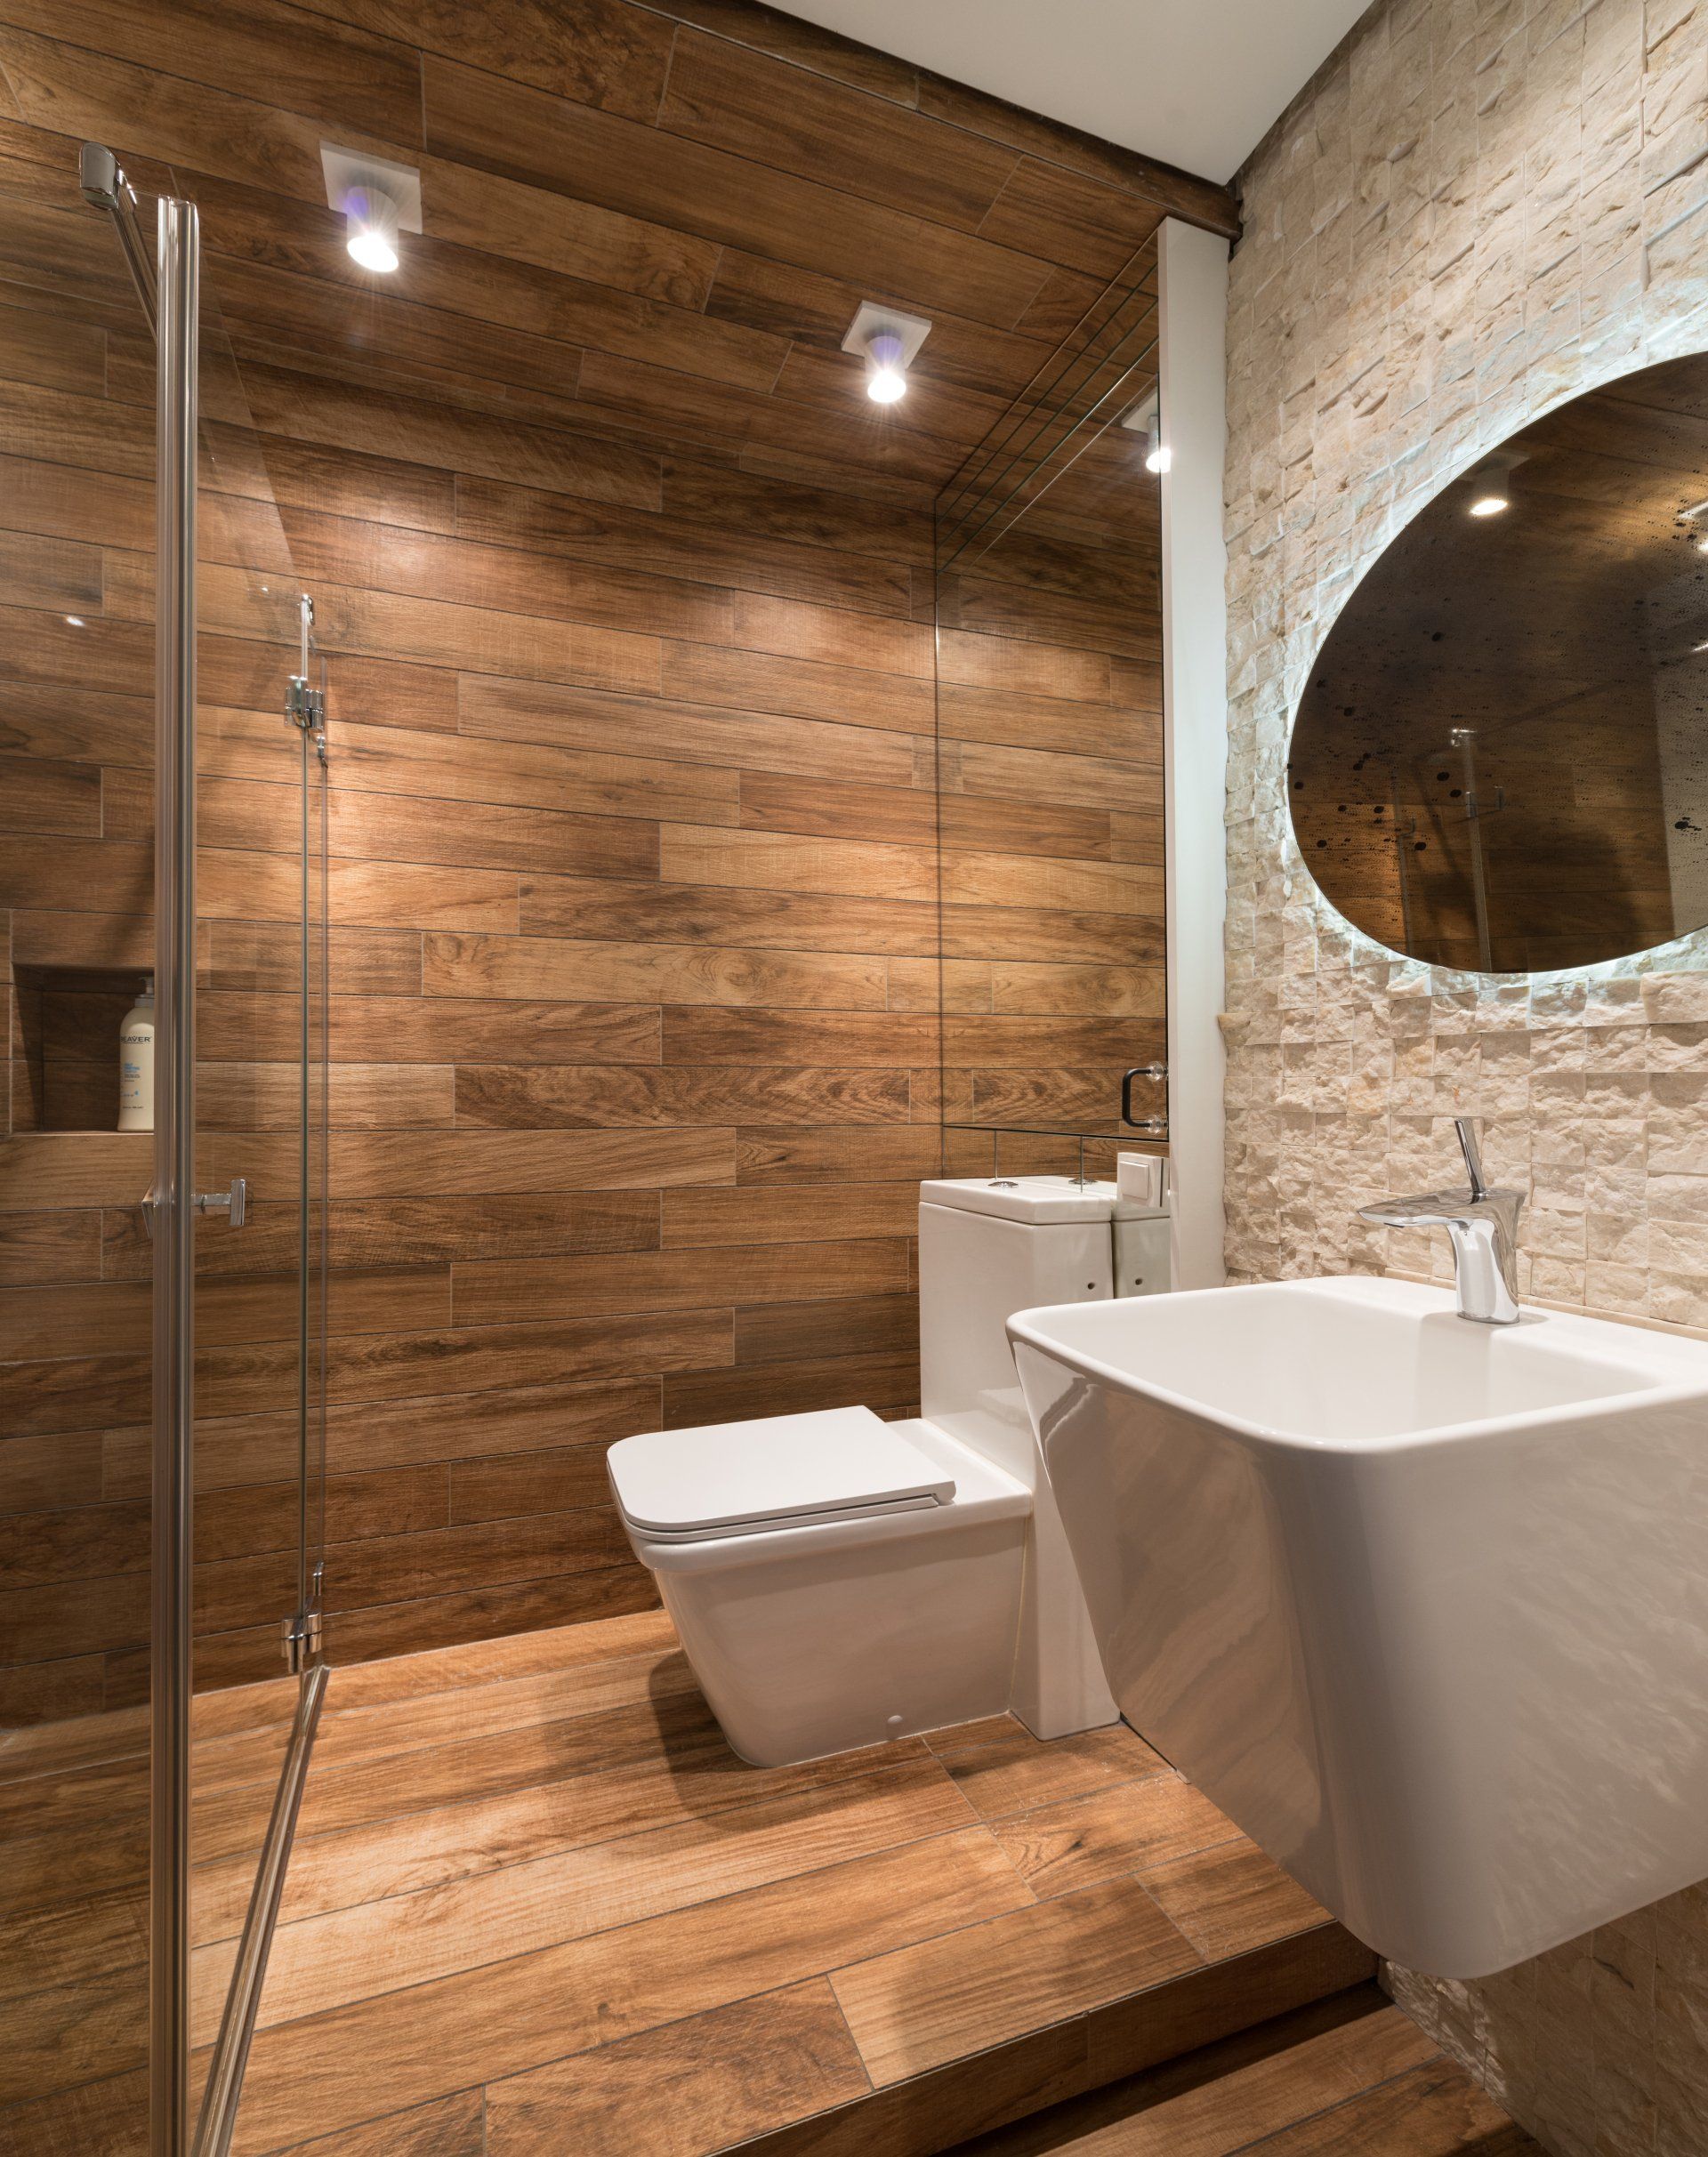 Bathroom makeover using natural wood tones and cream stone walls